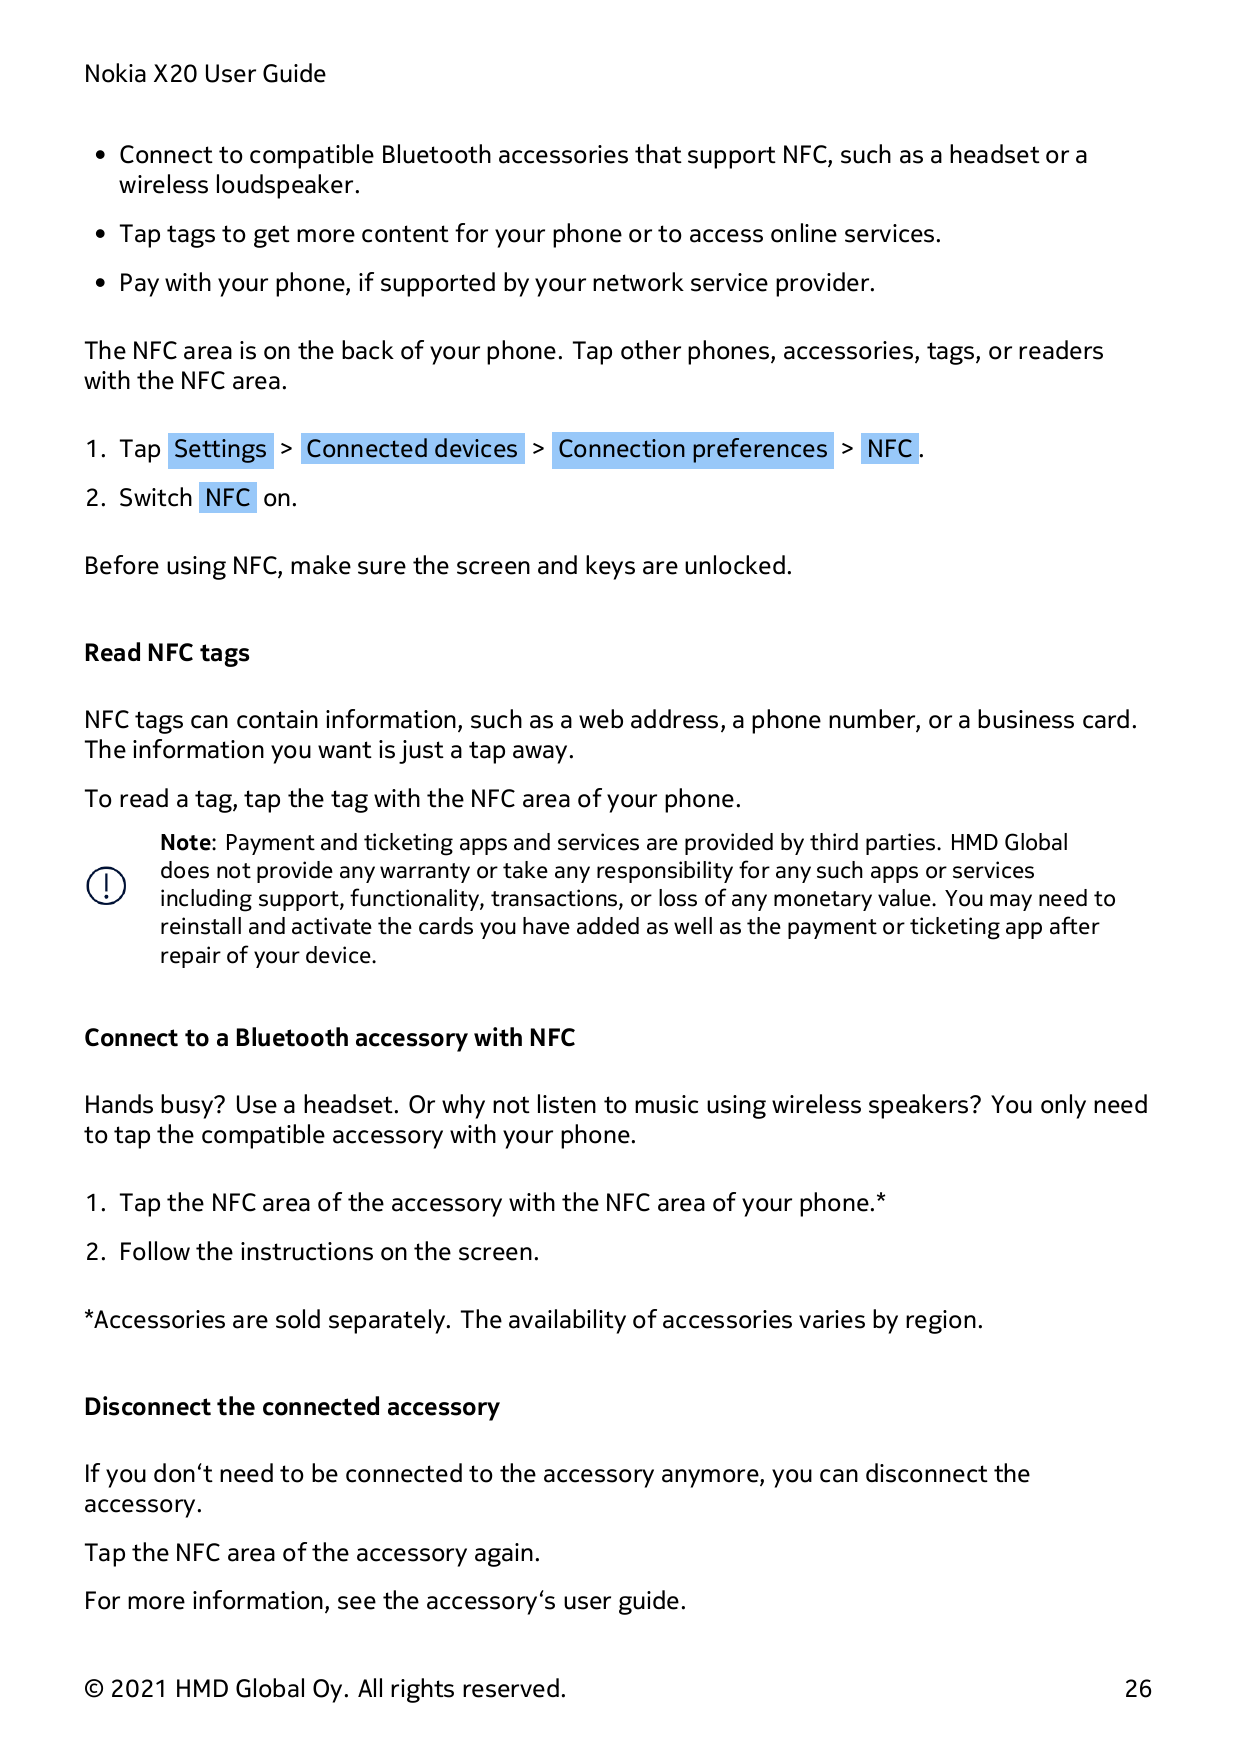 Nokia X20 User Guide• Connect to compatible Bluetooth accessories that support NFC, such as a headset or awireless loudspeaker.•